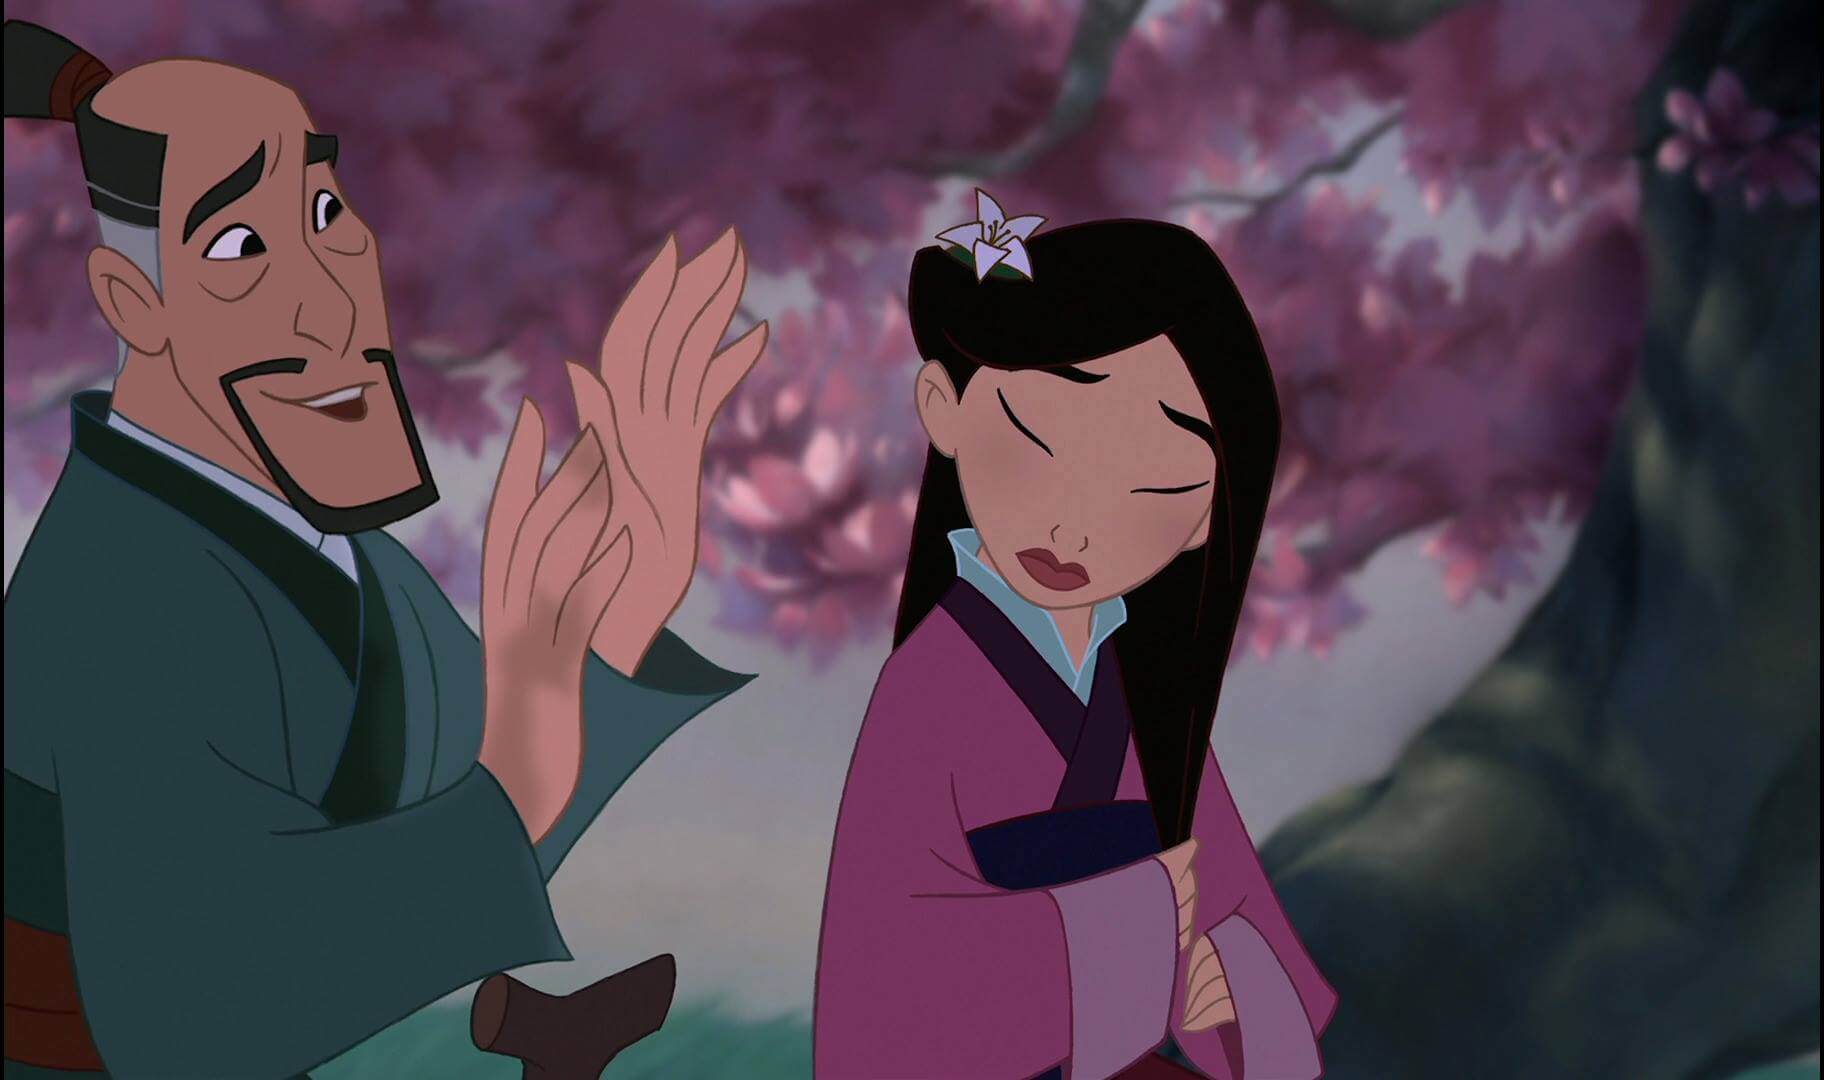 Commentary: Why I'm not a fan of Disney's 1998 'Mulan' - Los Angeles Times